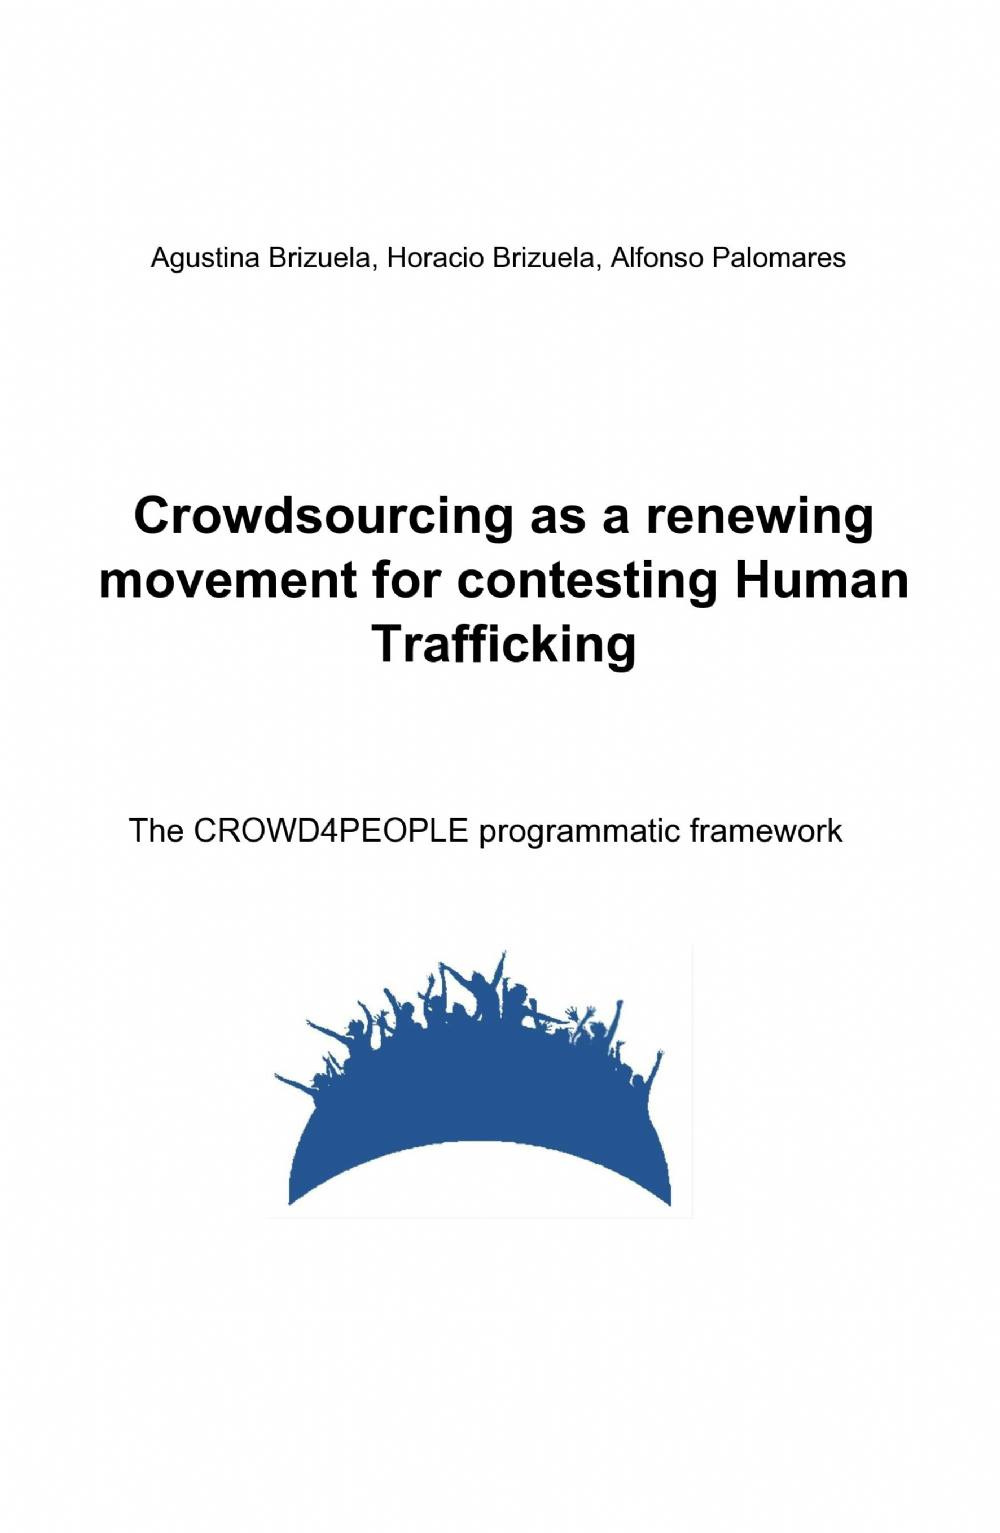 Crowdsourcing as a renewing movement for contesting human trafficking